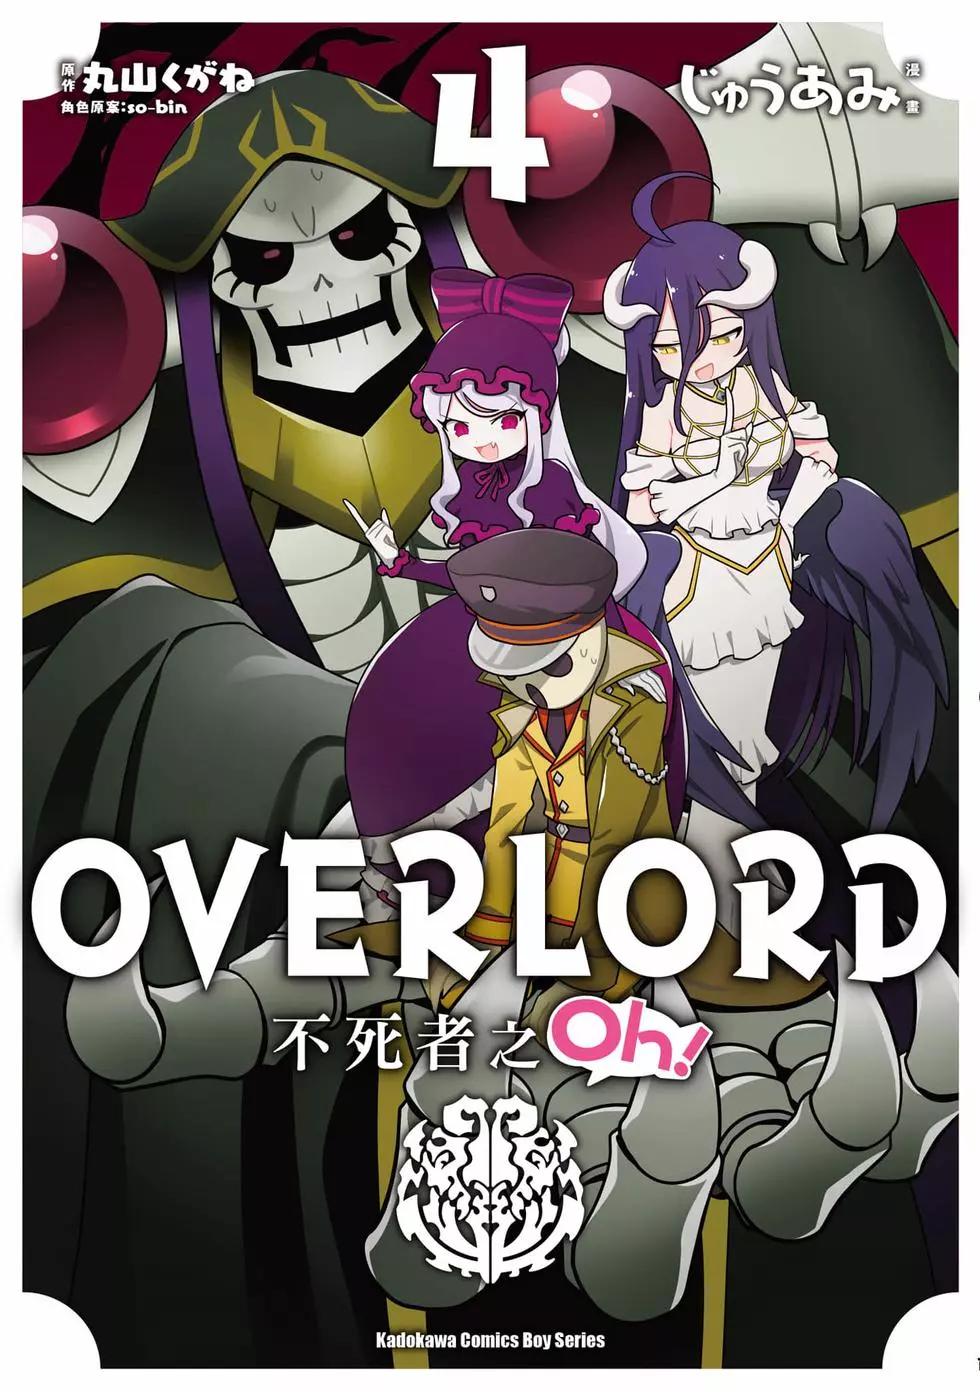 Overlord不死者之OH！ - 第04卷(1/3) - 1